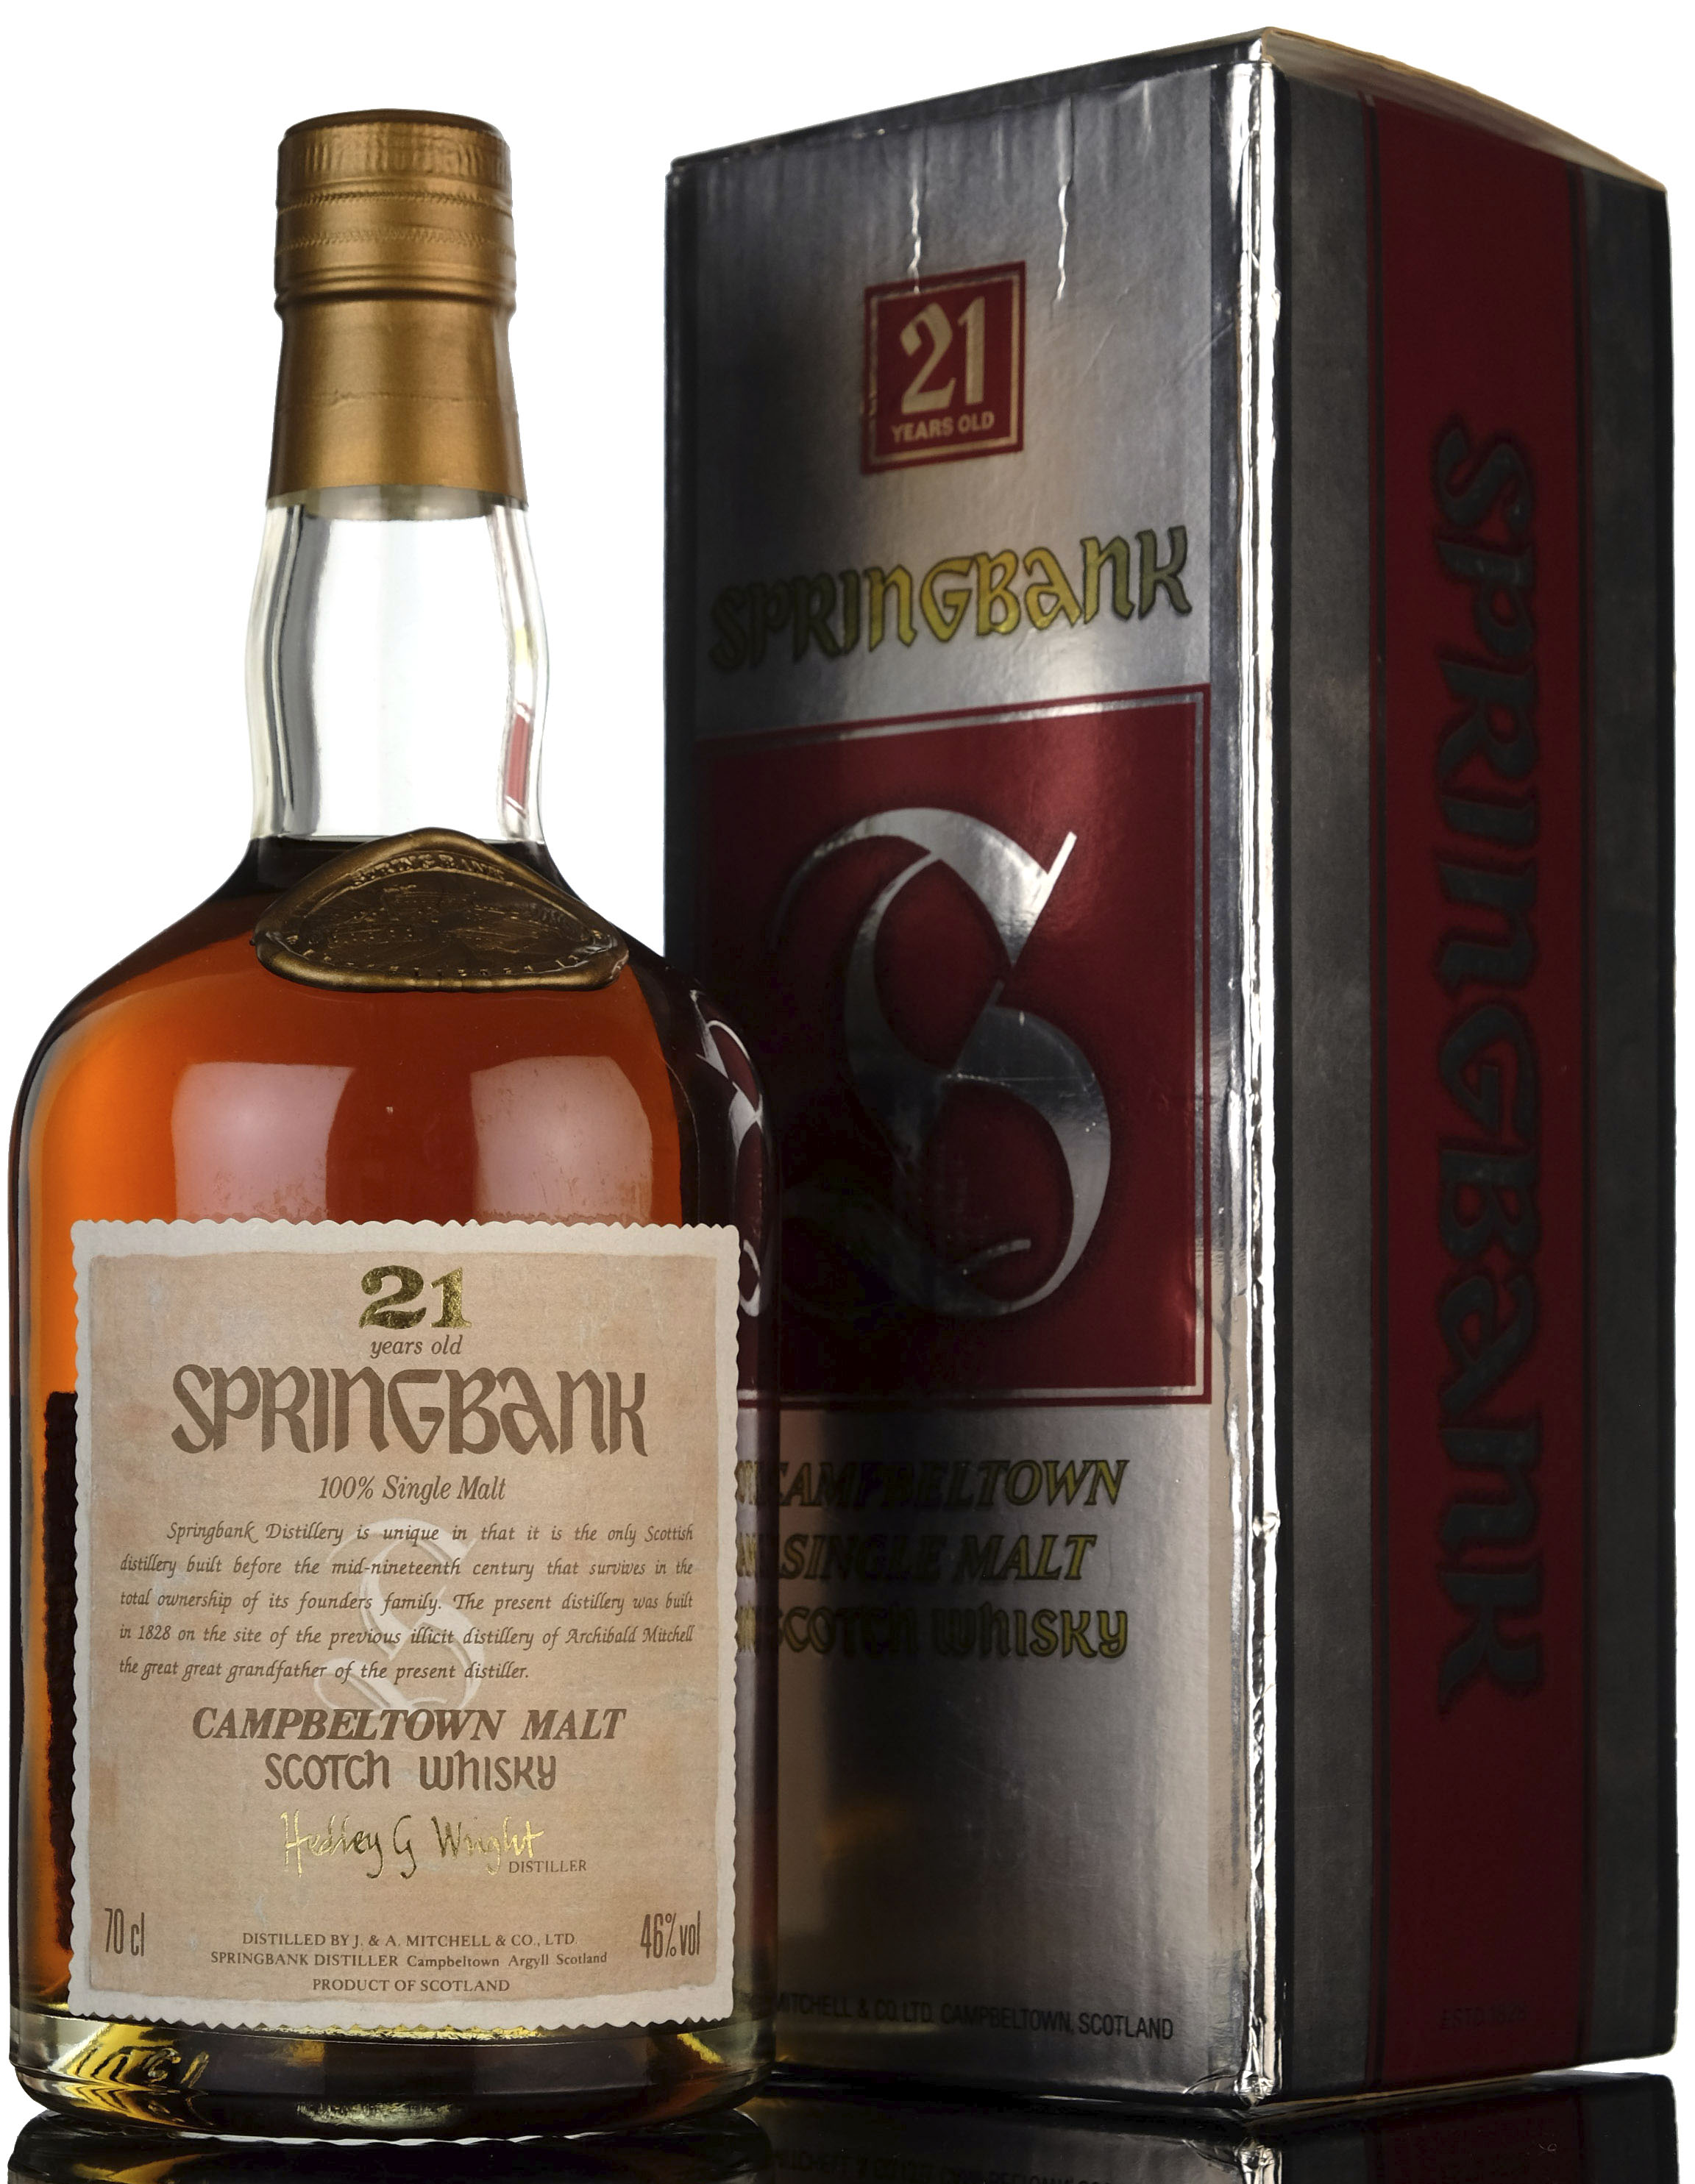 Springbank 21 Year Old - 1990s - Hedley G Wright